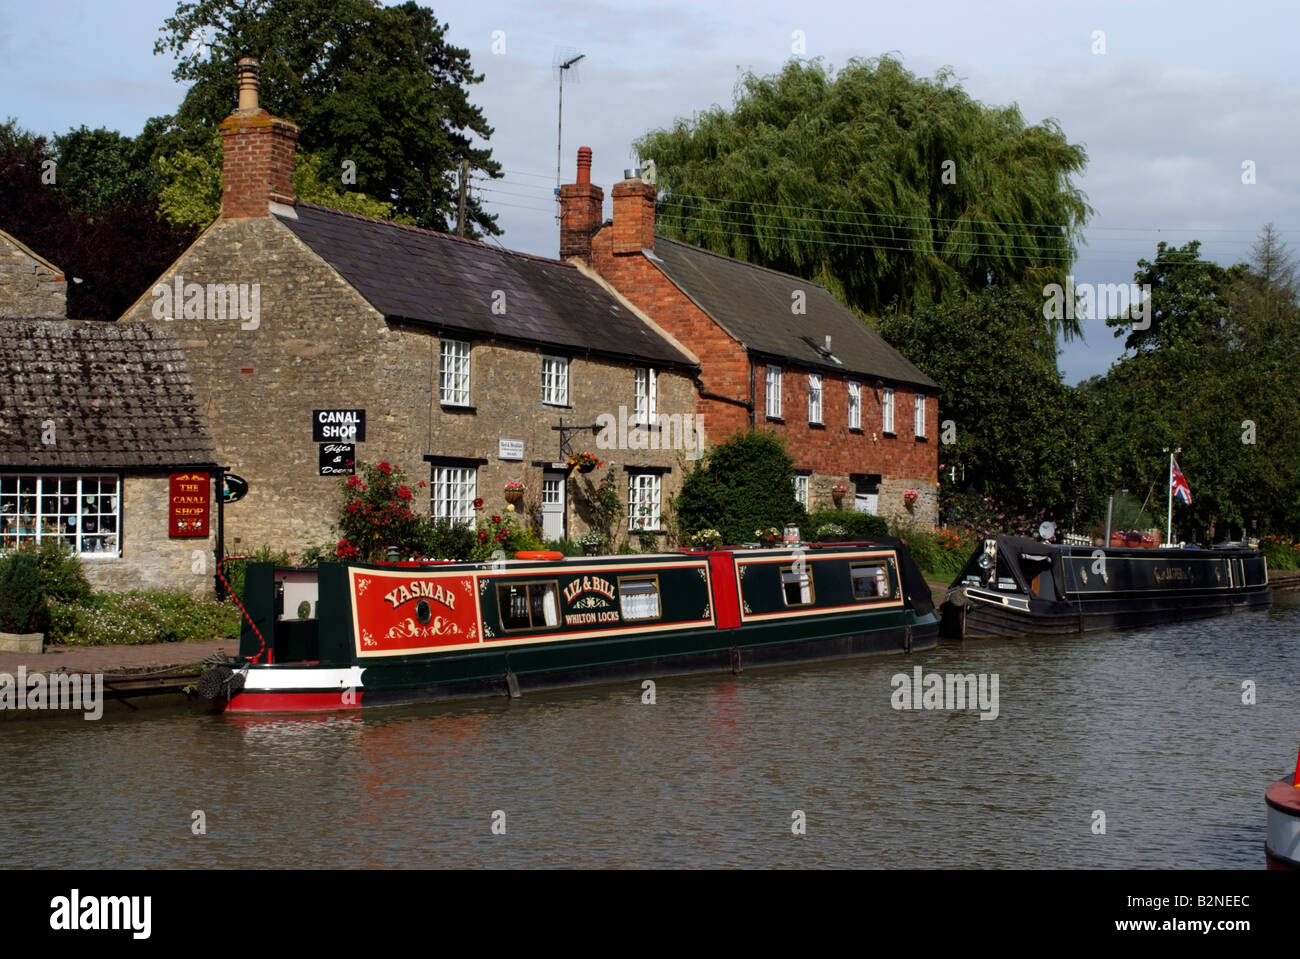 Narrowboats and canal shop on the Grand Union Canal at Stoke Bruerne Northamptonshire England Stock Photo